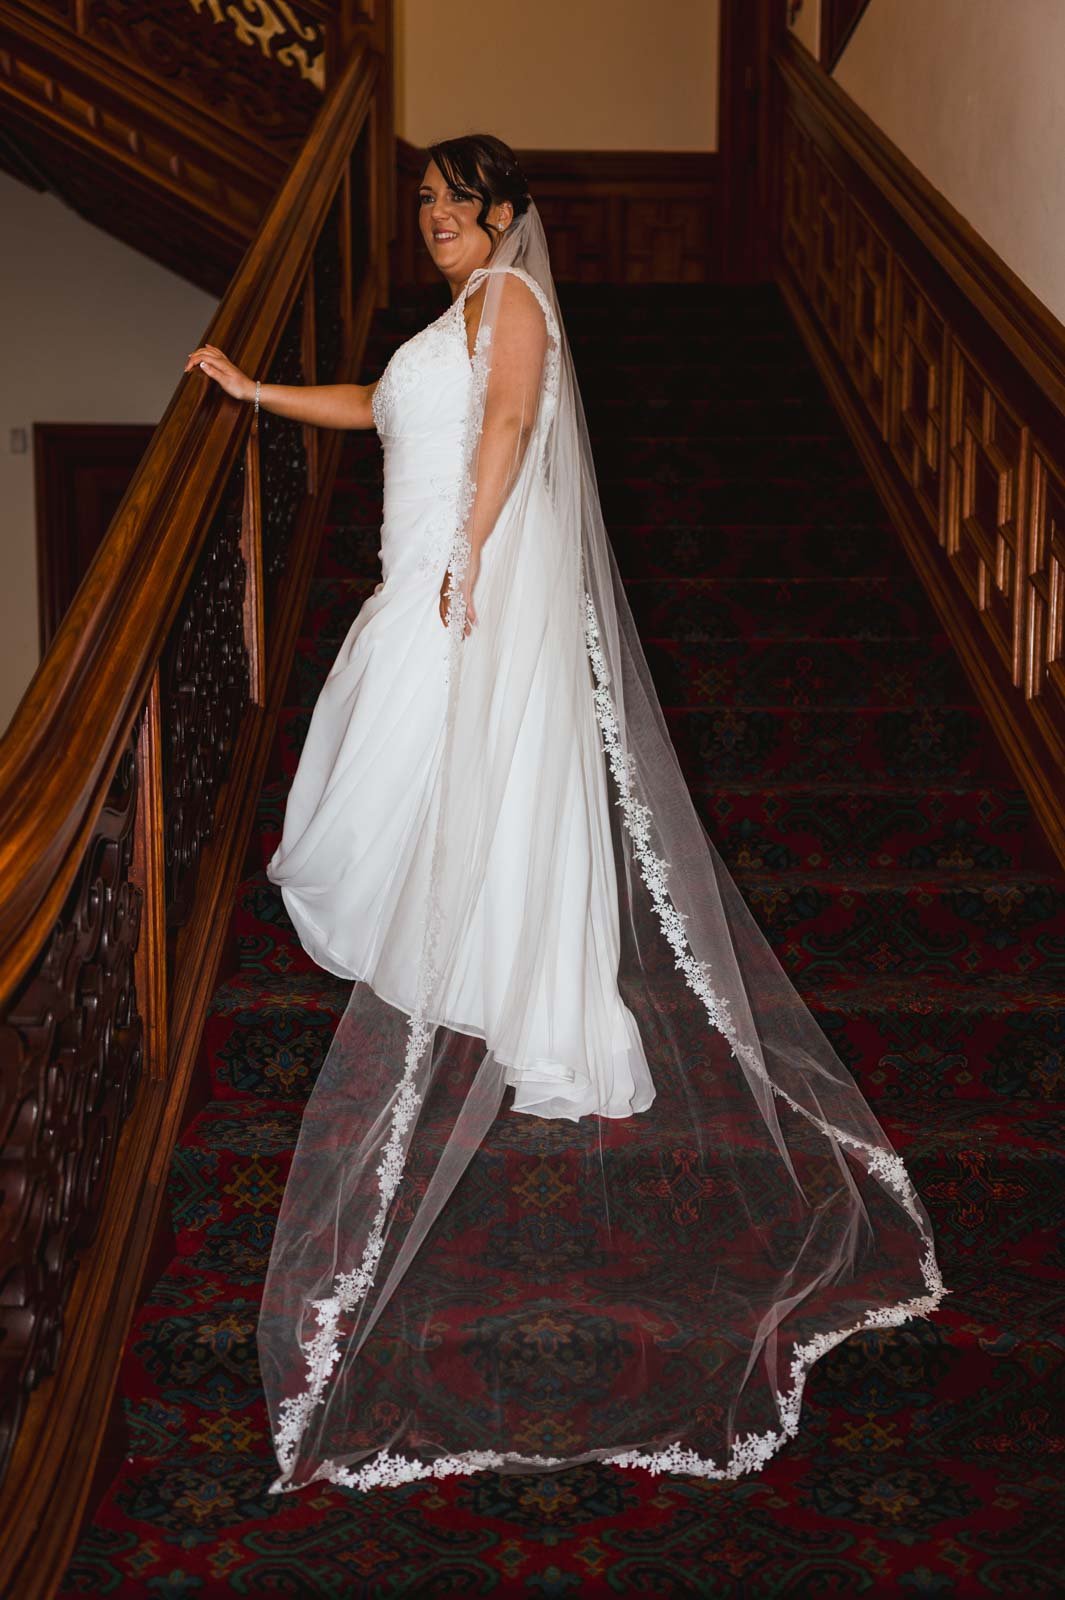  Full bride’s wedding dress as she is standing at an angle inside stairs with one hand on the banister. 